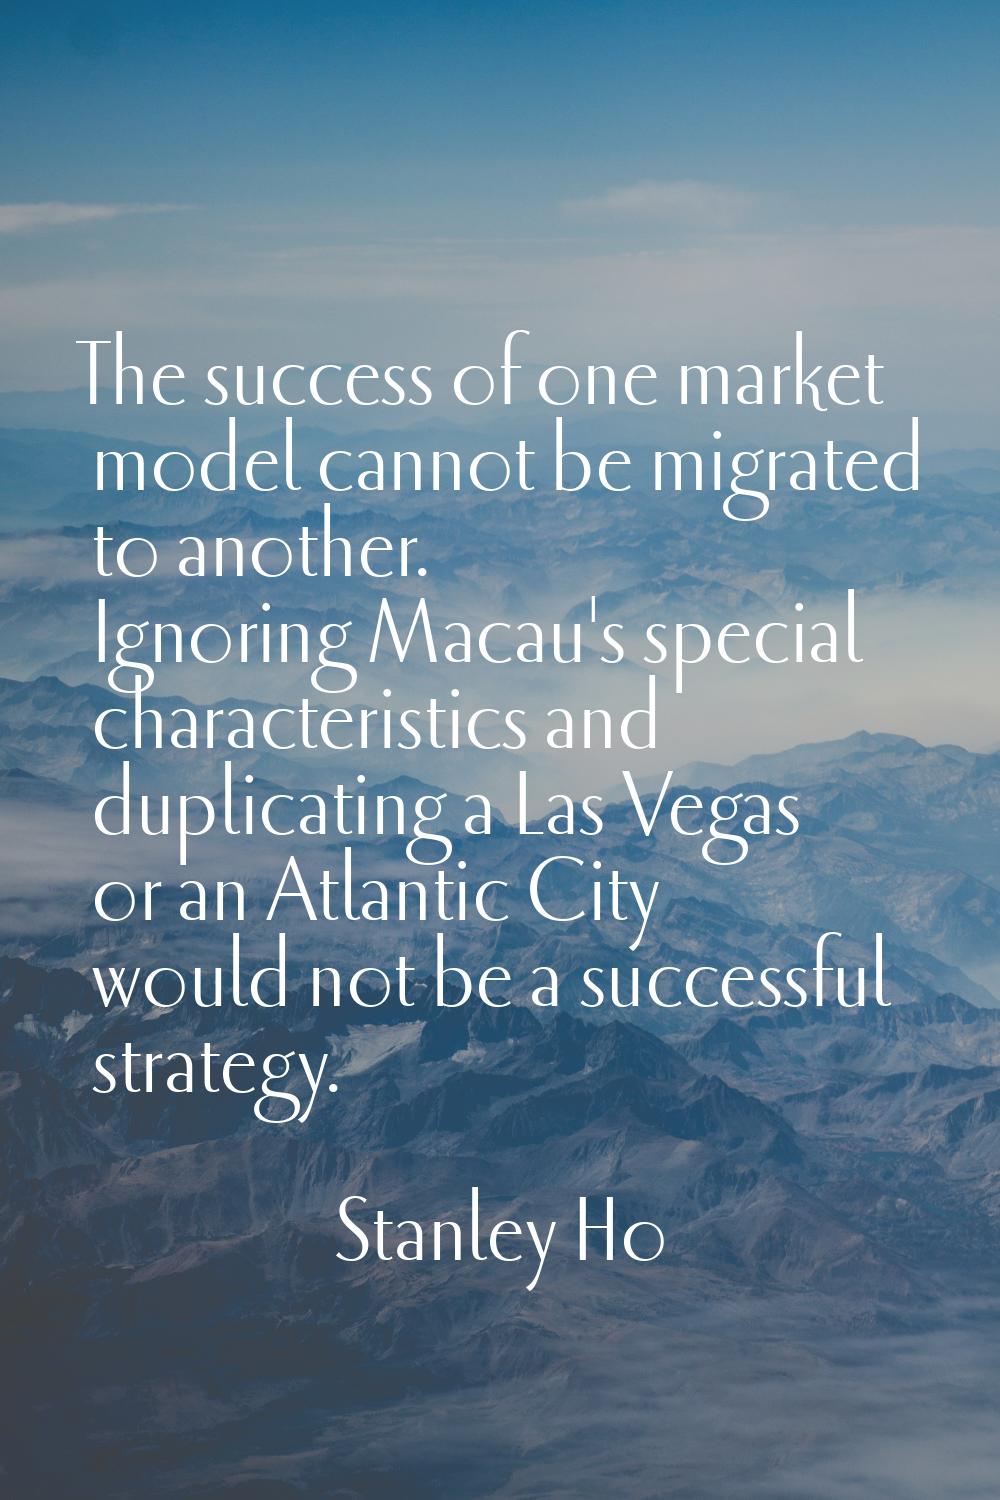 The success of one market model cannot be migrated to another. Ignoring Macau's special characteris